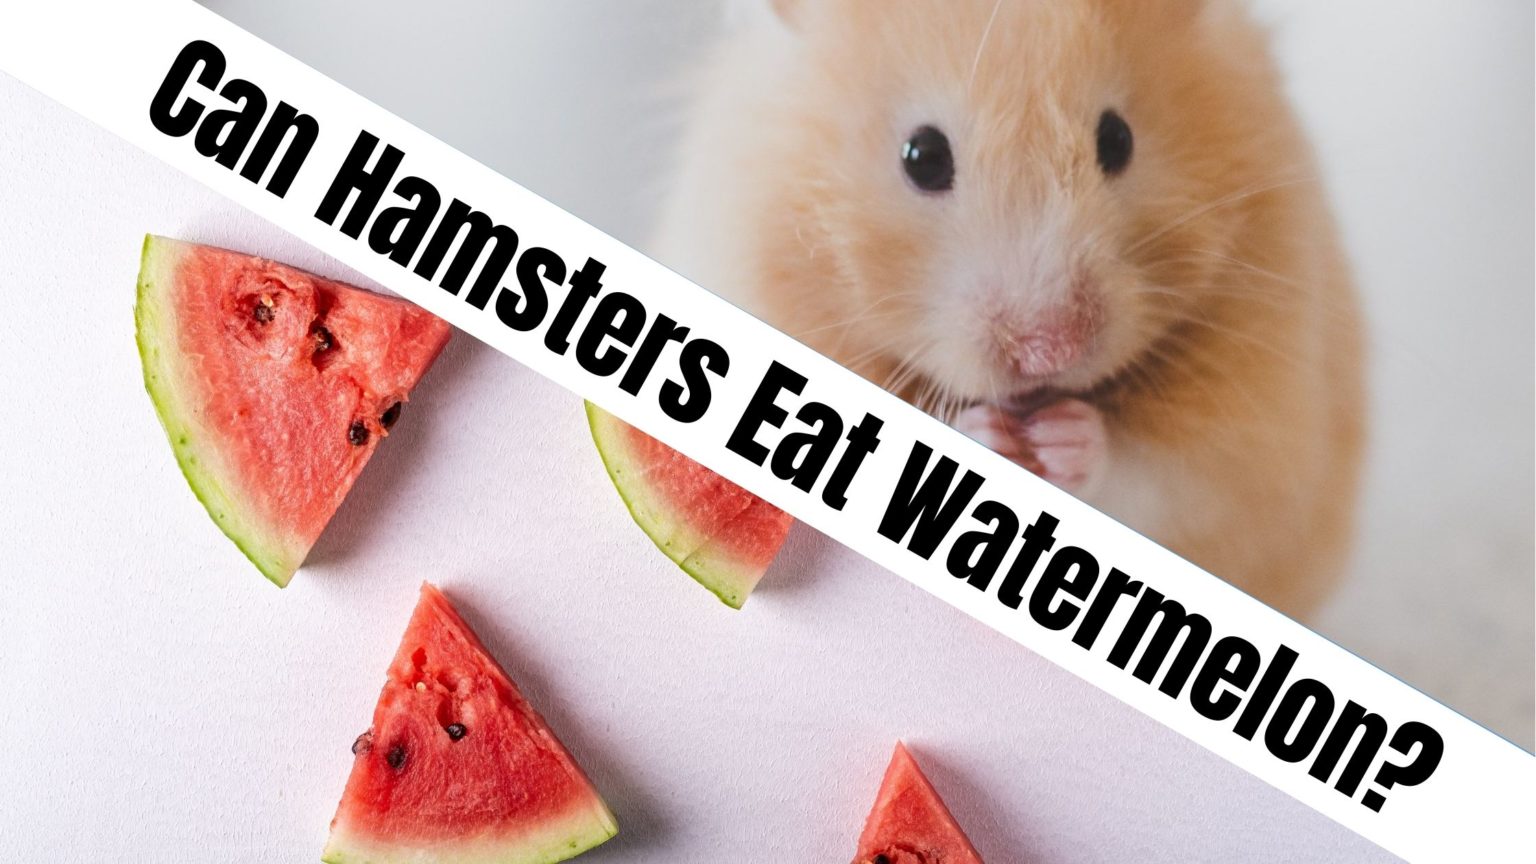 Can Hamsters Eat Watermelon? Let's Find Out!